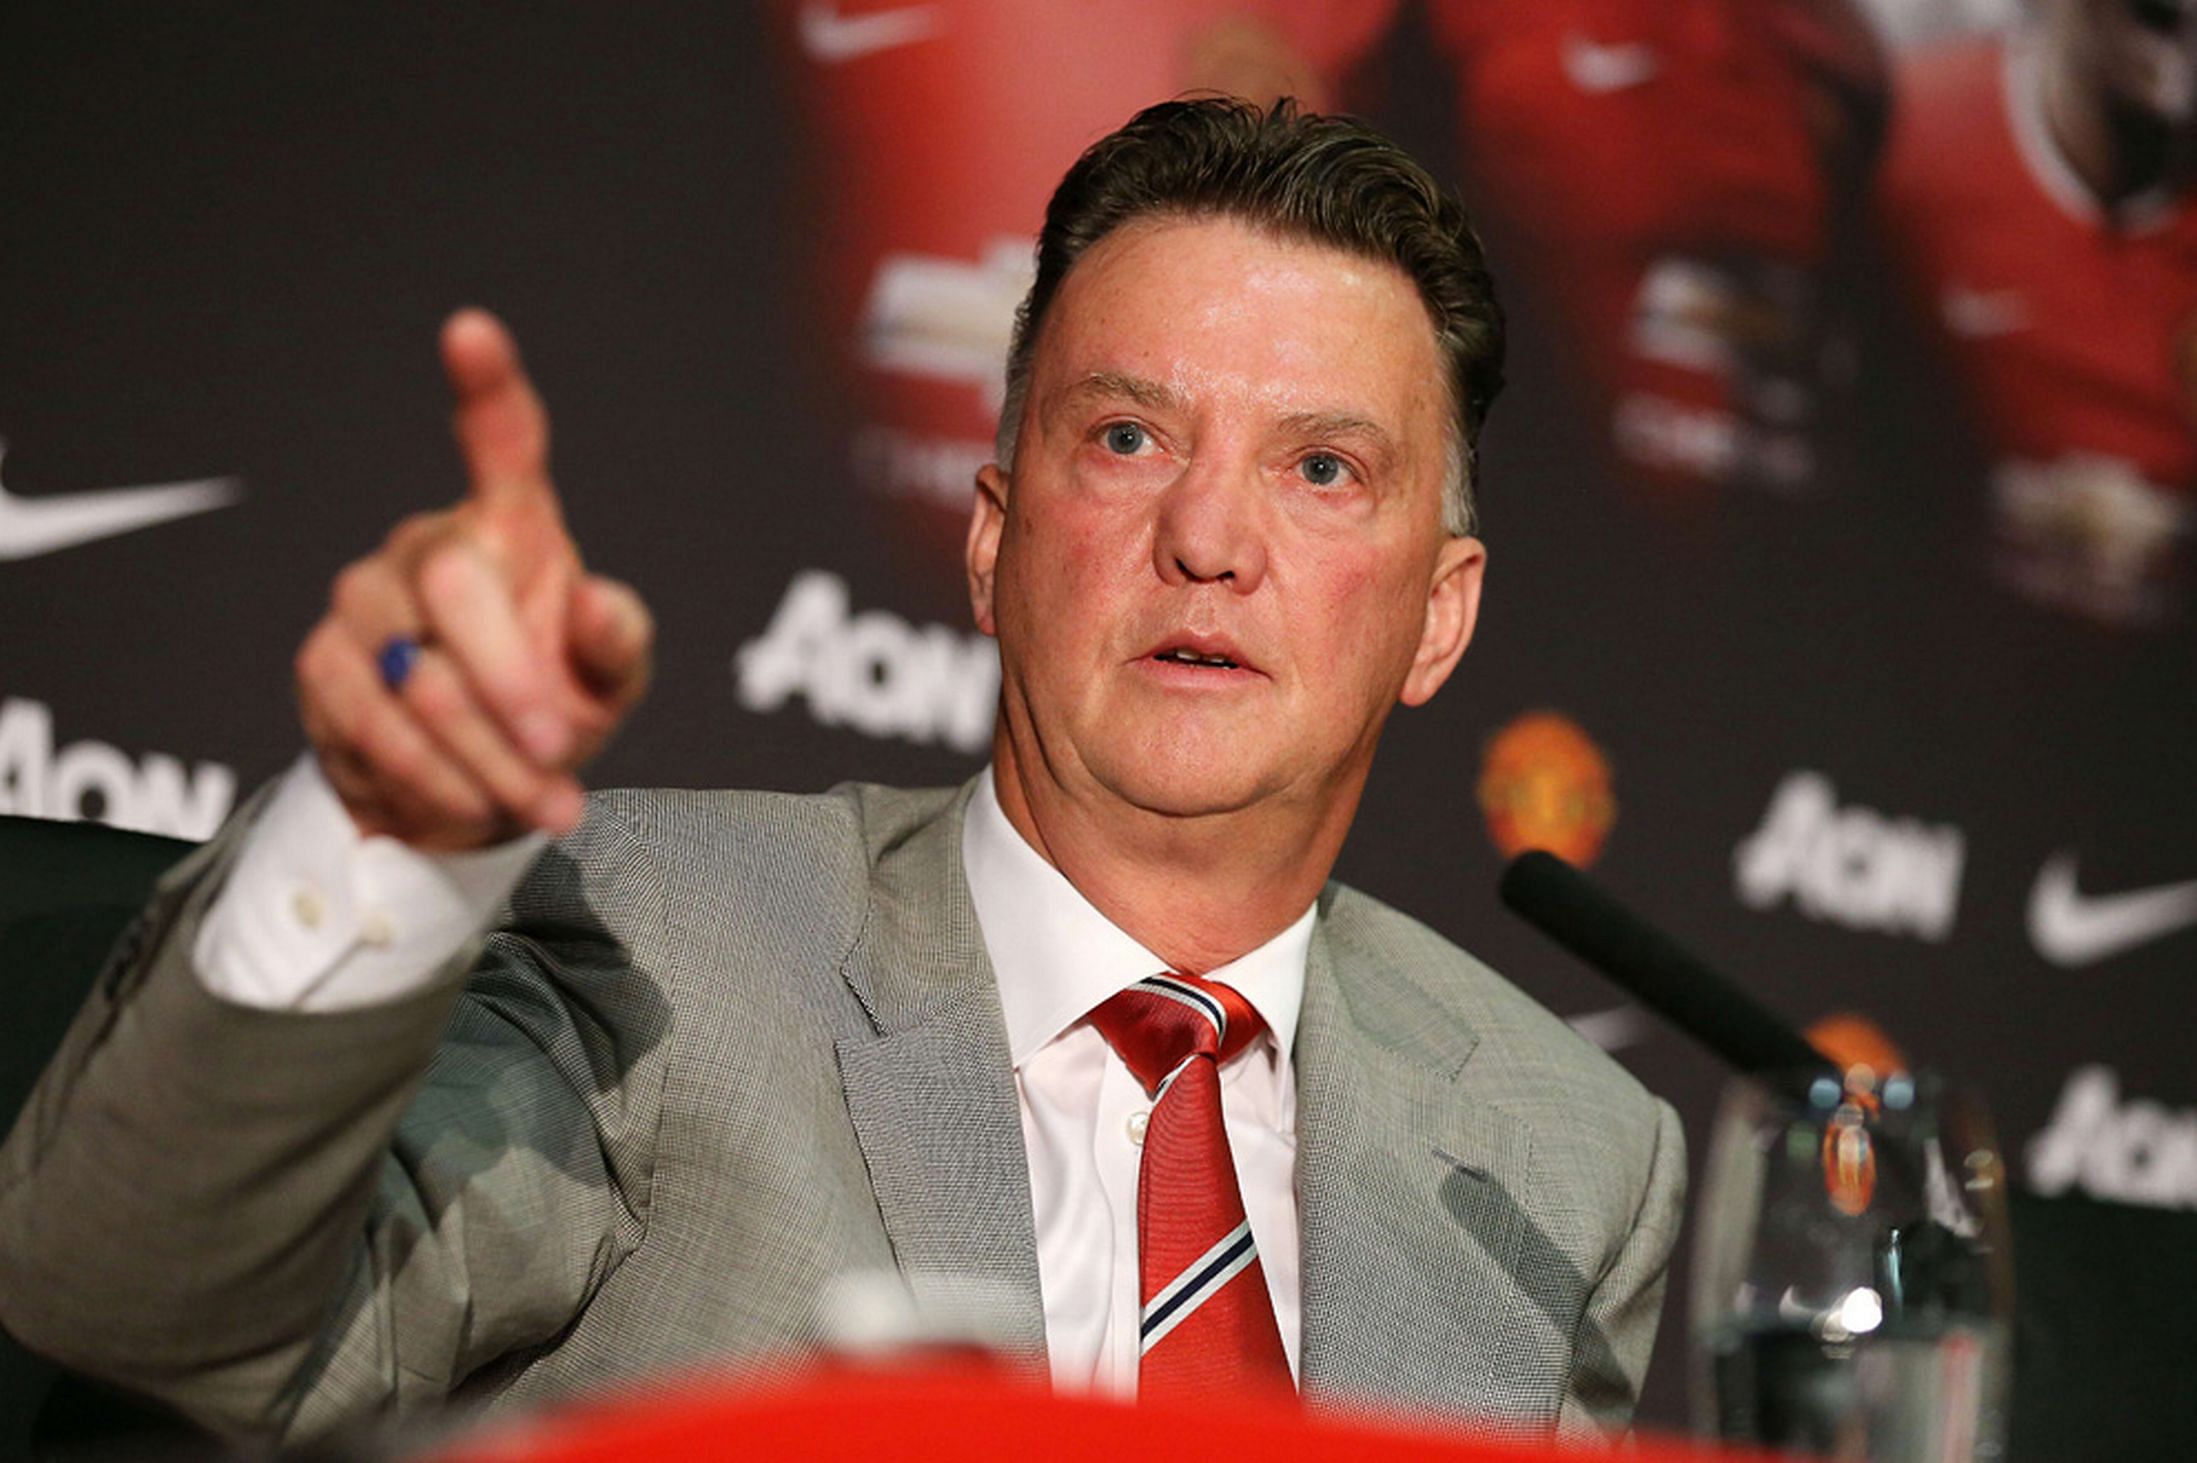 Louis van Gaal's 3-5-2 and why the philosophy is not working at the moment